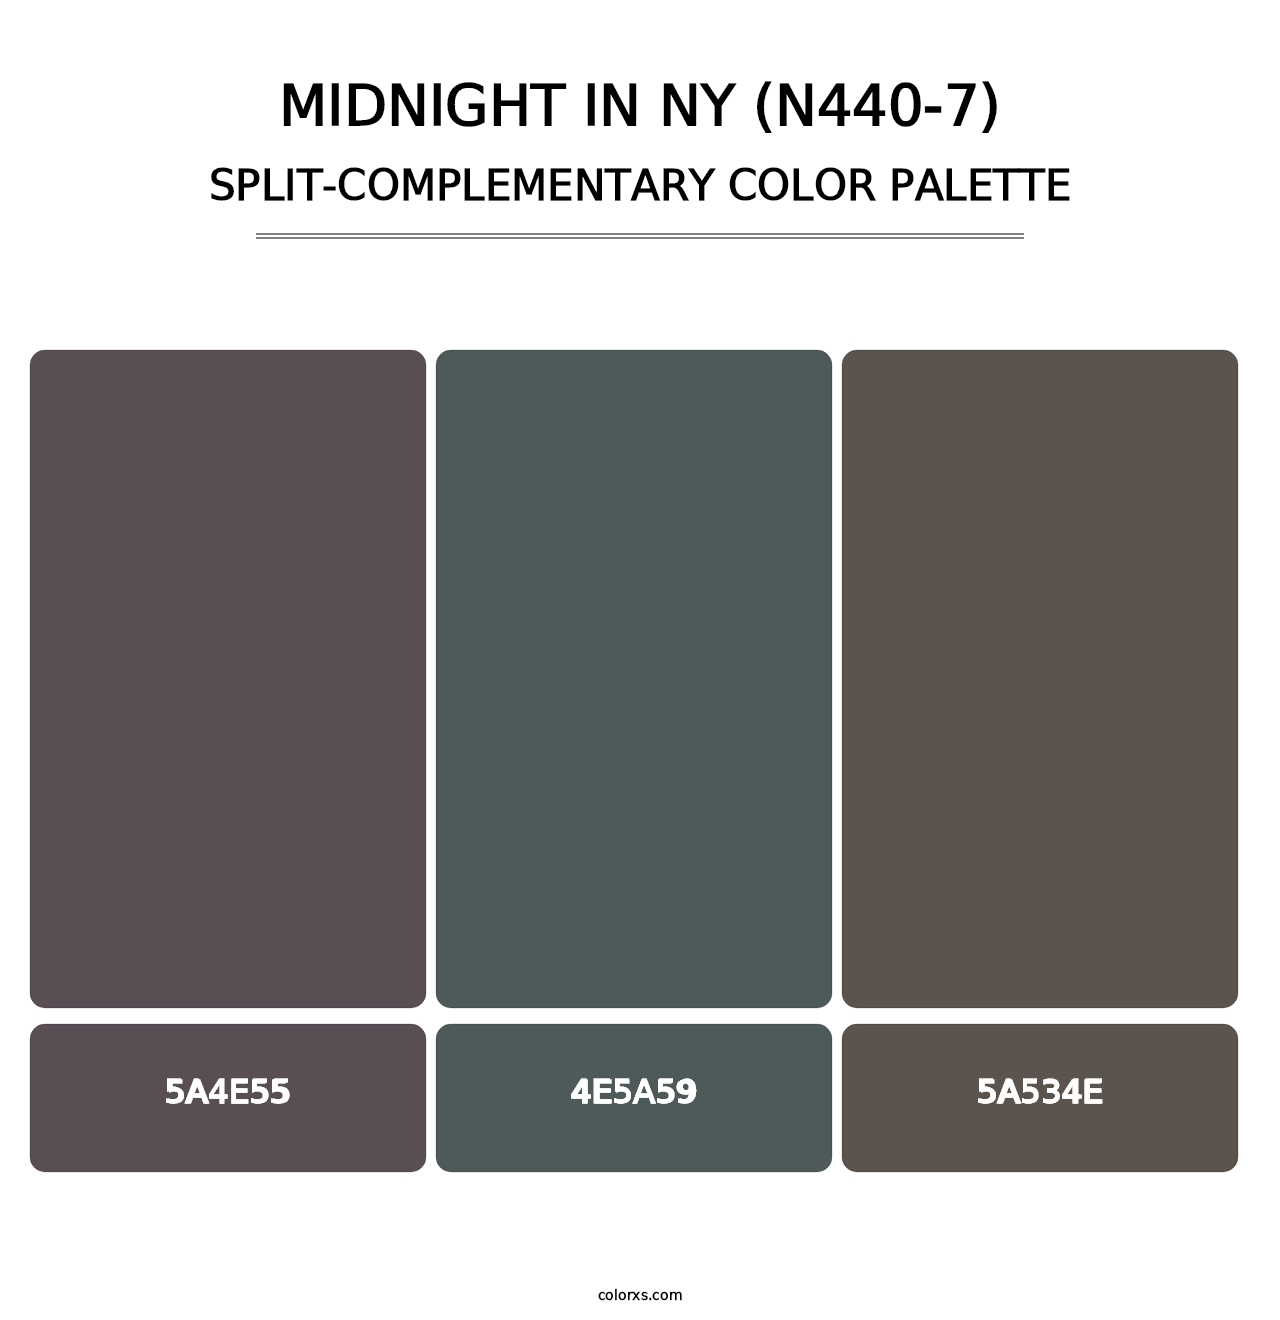 Midnight In Ny (N440-7) - Split-Complementary Color Palette